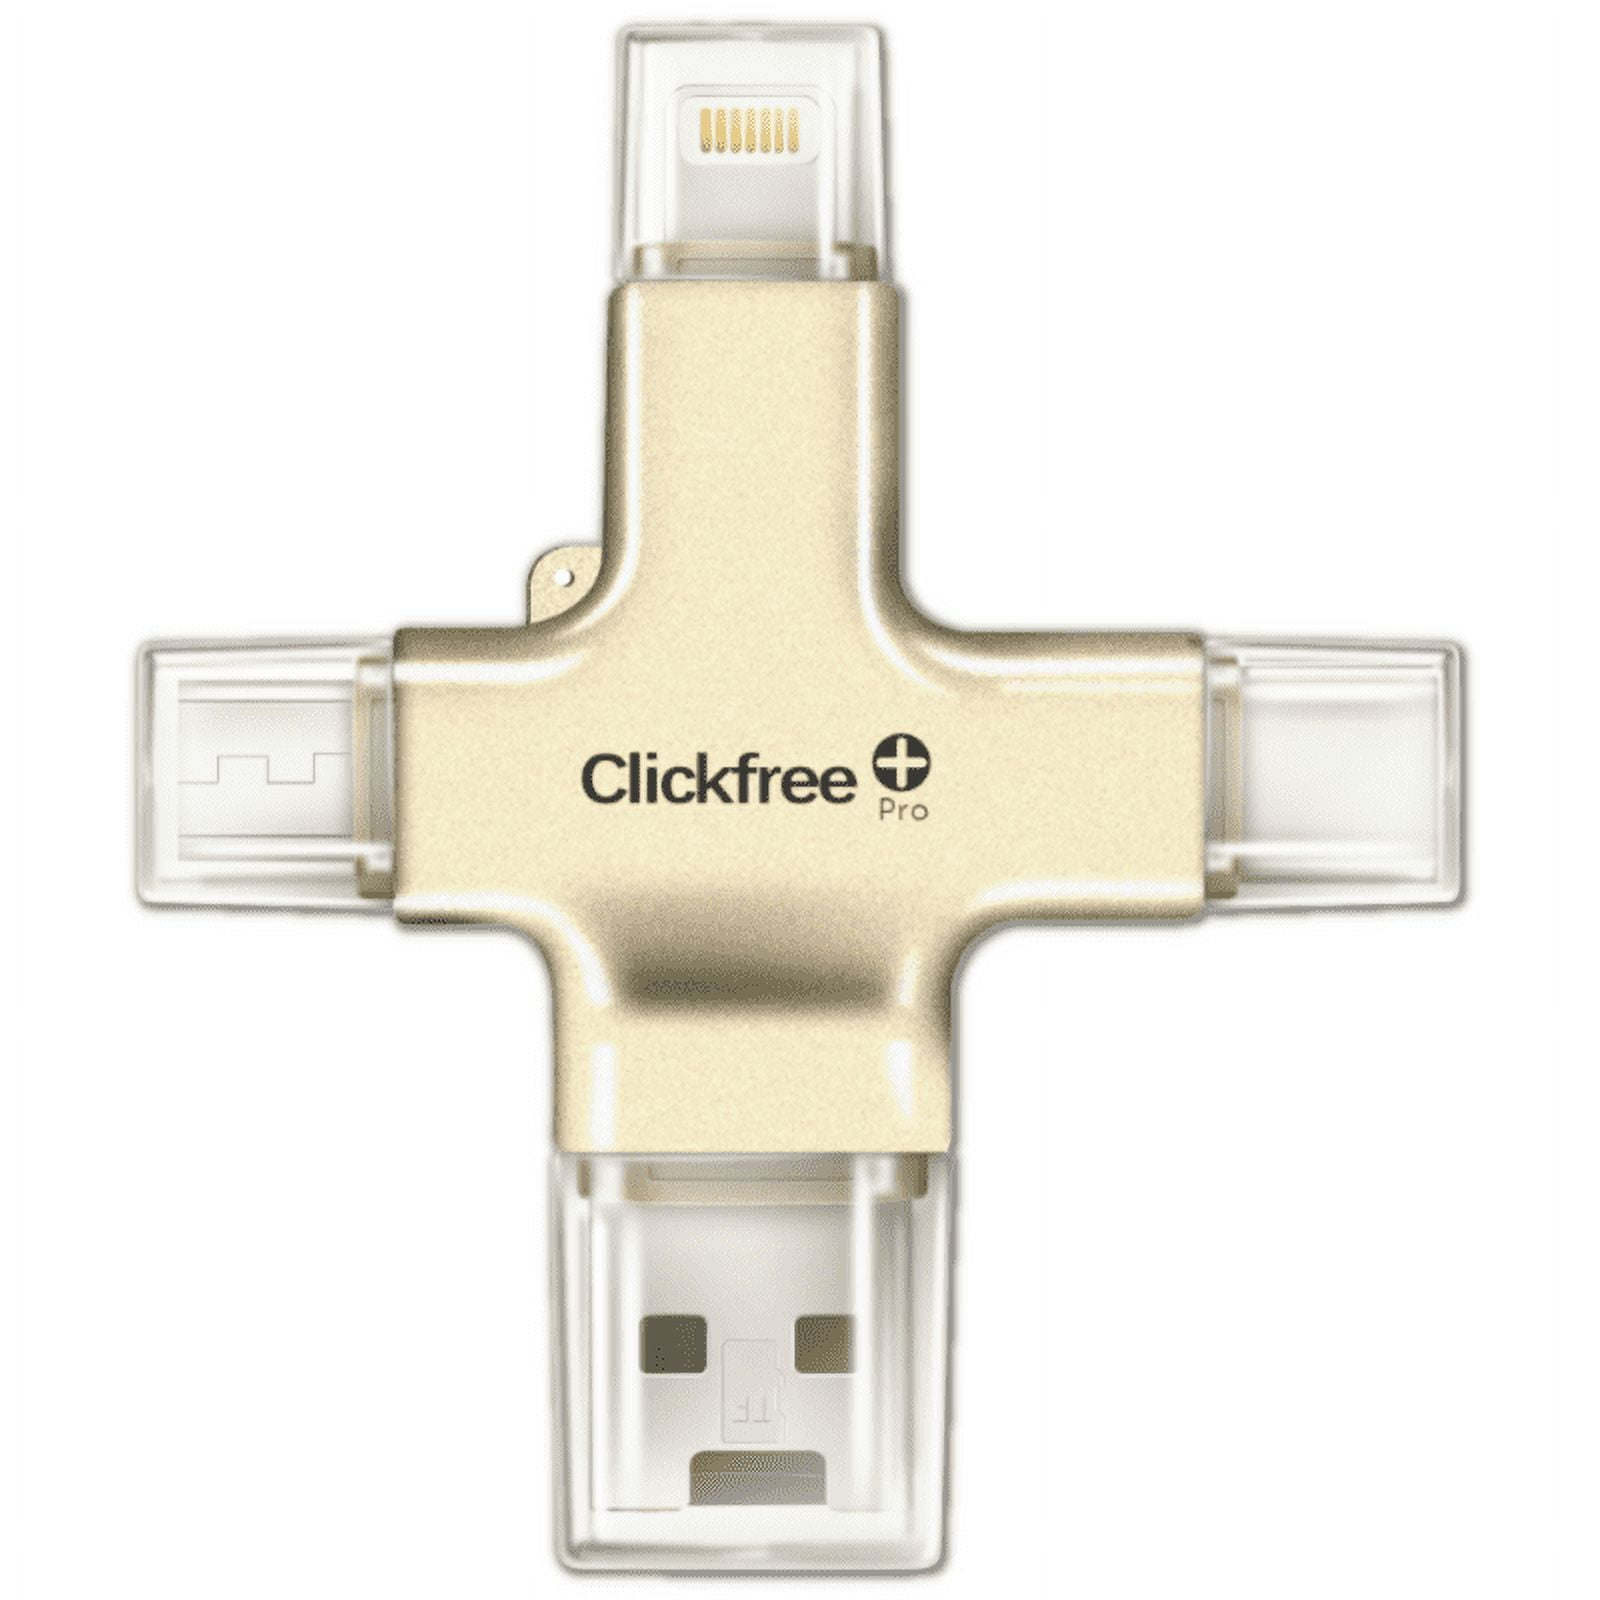  Clickfree™ PRO USB 3.0 MFi-Certified Photo and Video